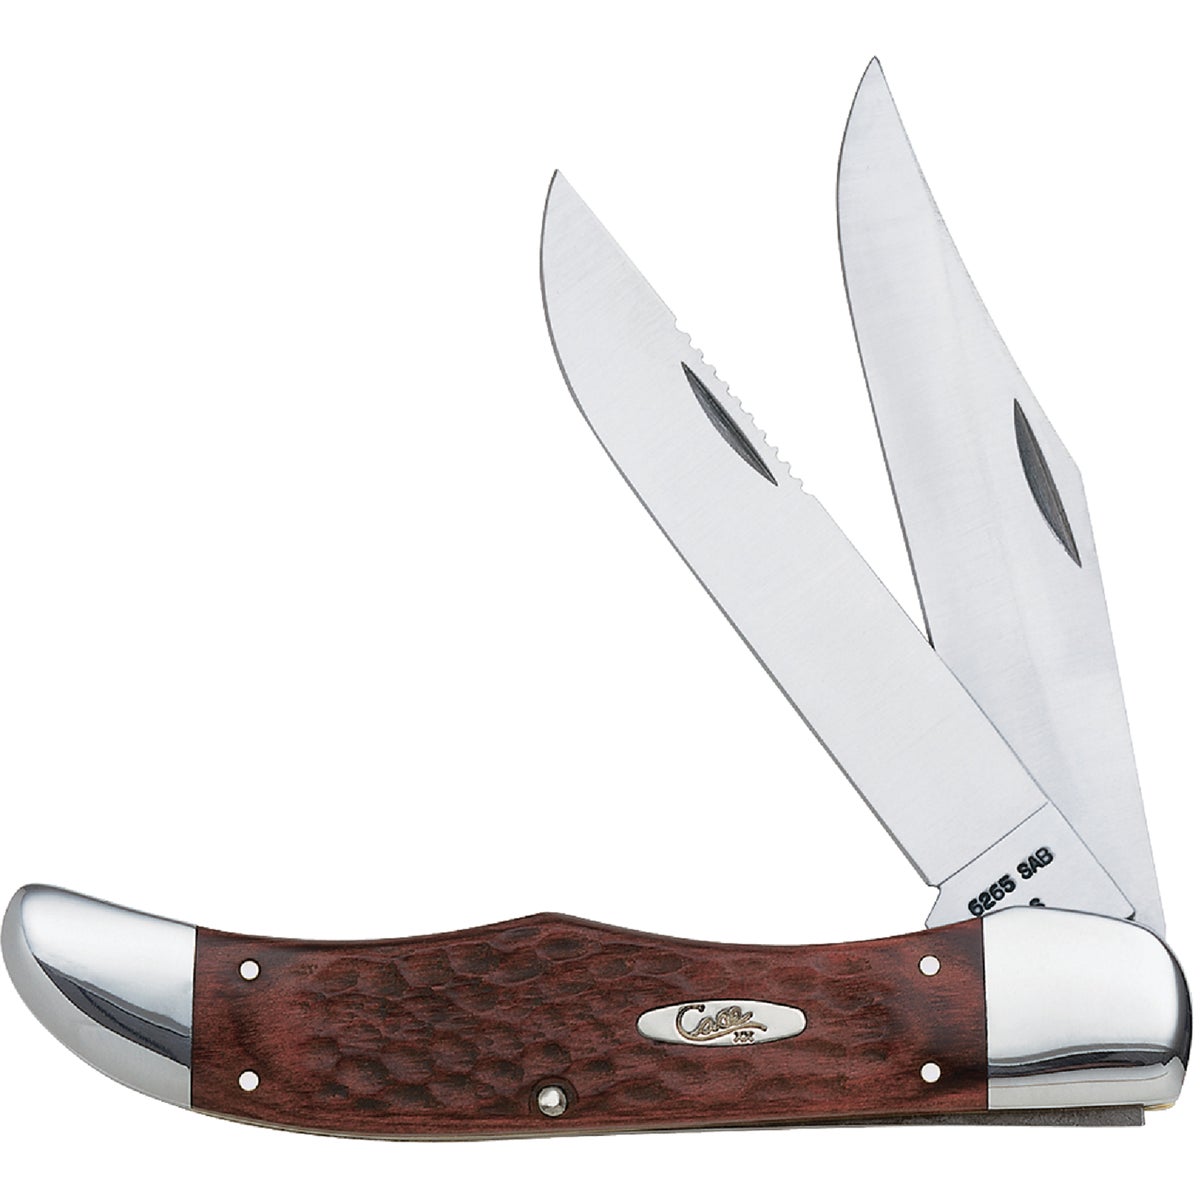 Item 826472, Jigged brown staminawood handle with surgical steel skinner blade and 4" 